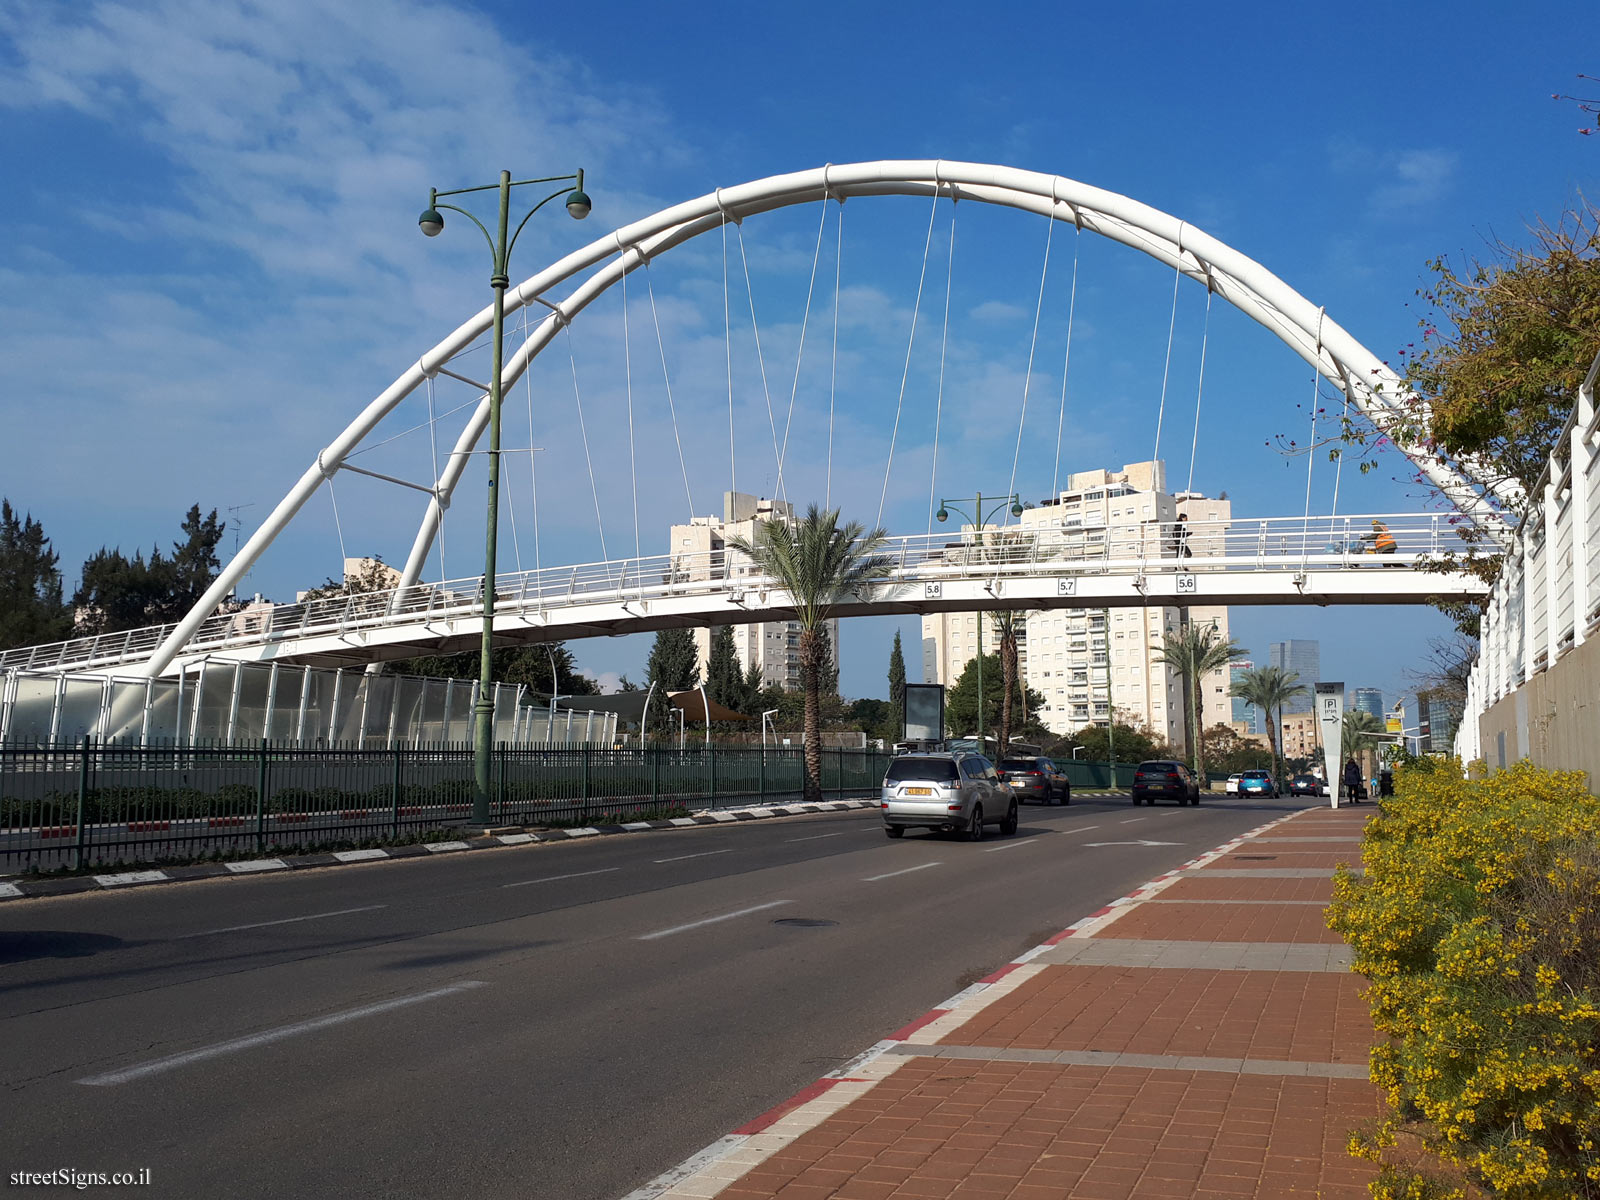 Givatayim - Bridge named for Isaac Drezia - A view  from the Rabin road